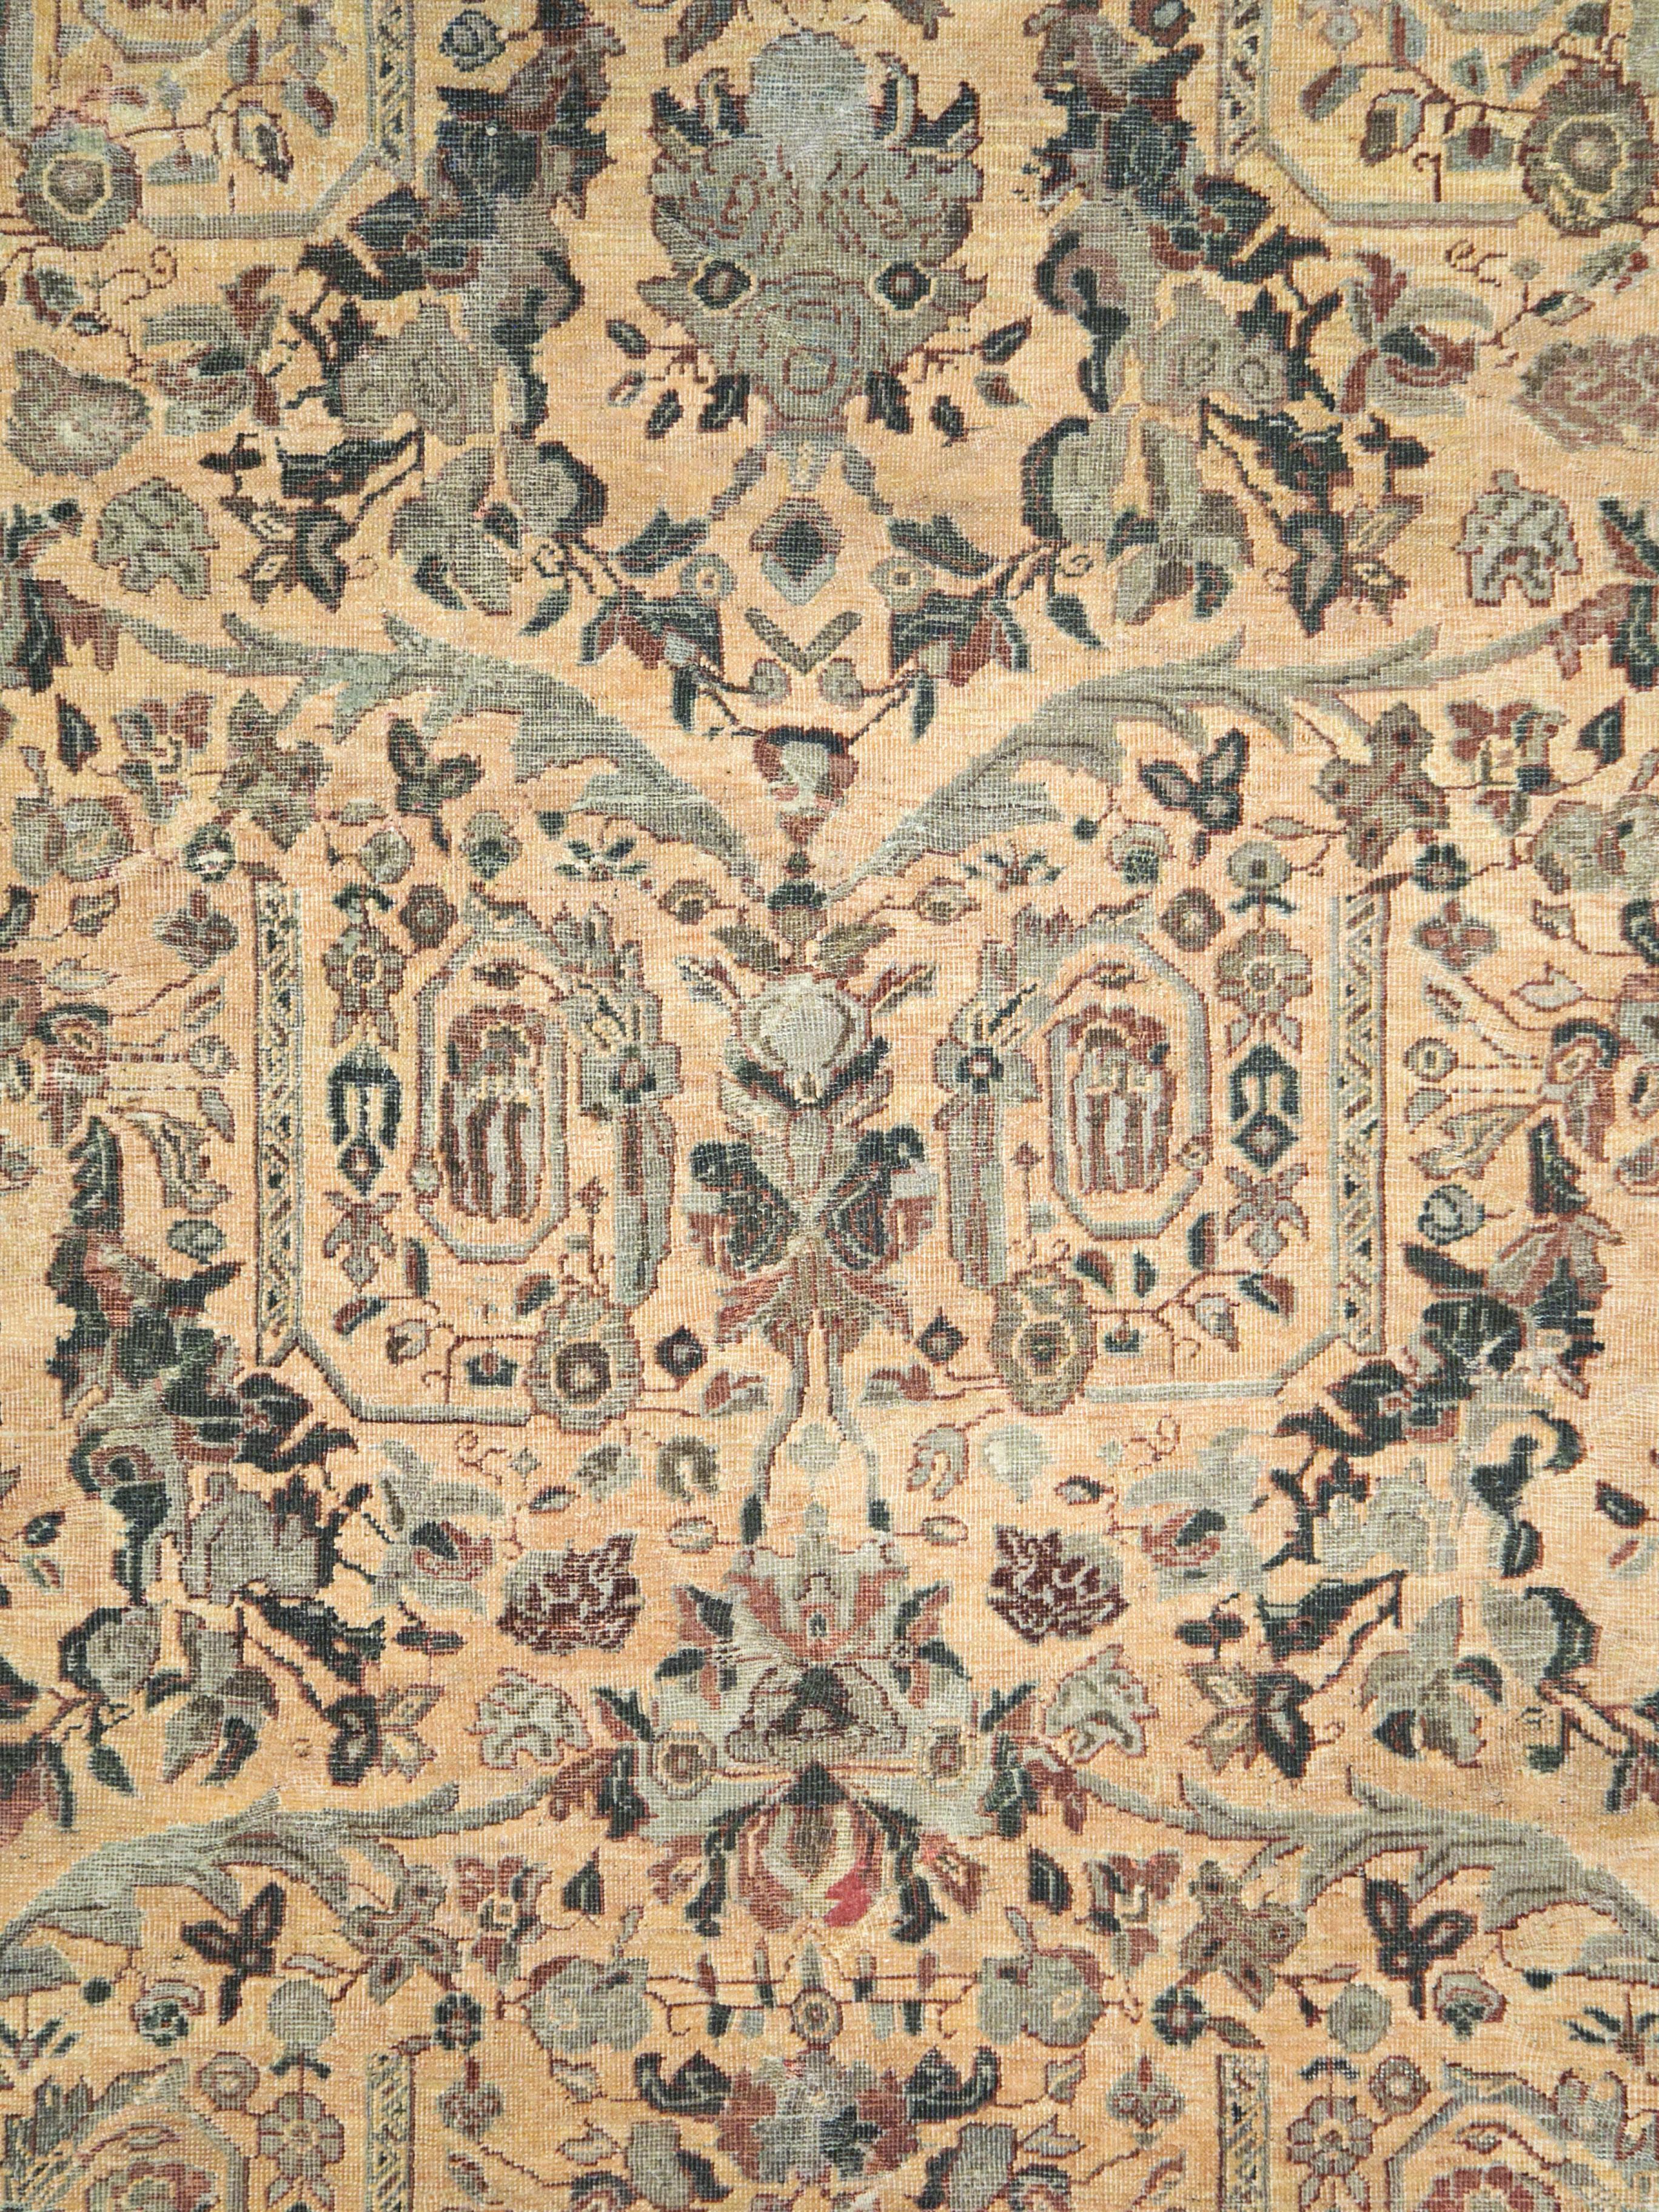 An antique Persian Mahal carpet from the early 20th century with a 'Mustafi' pattern of coiling leaf arabesques, broken wreaths, European-style flower bouquets and colorful floral straight festoons.